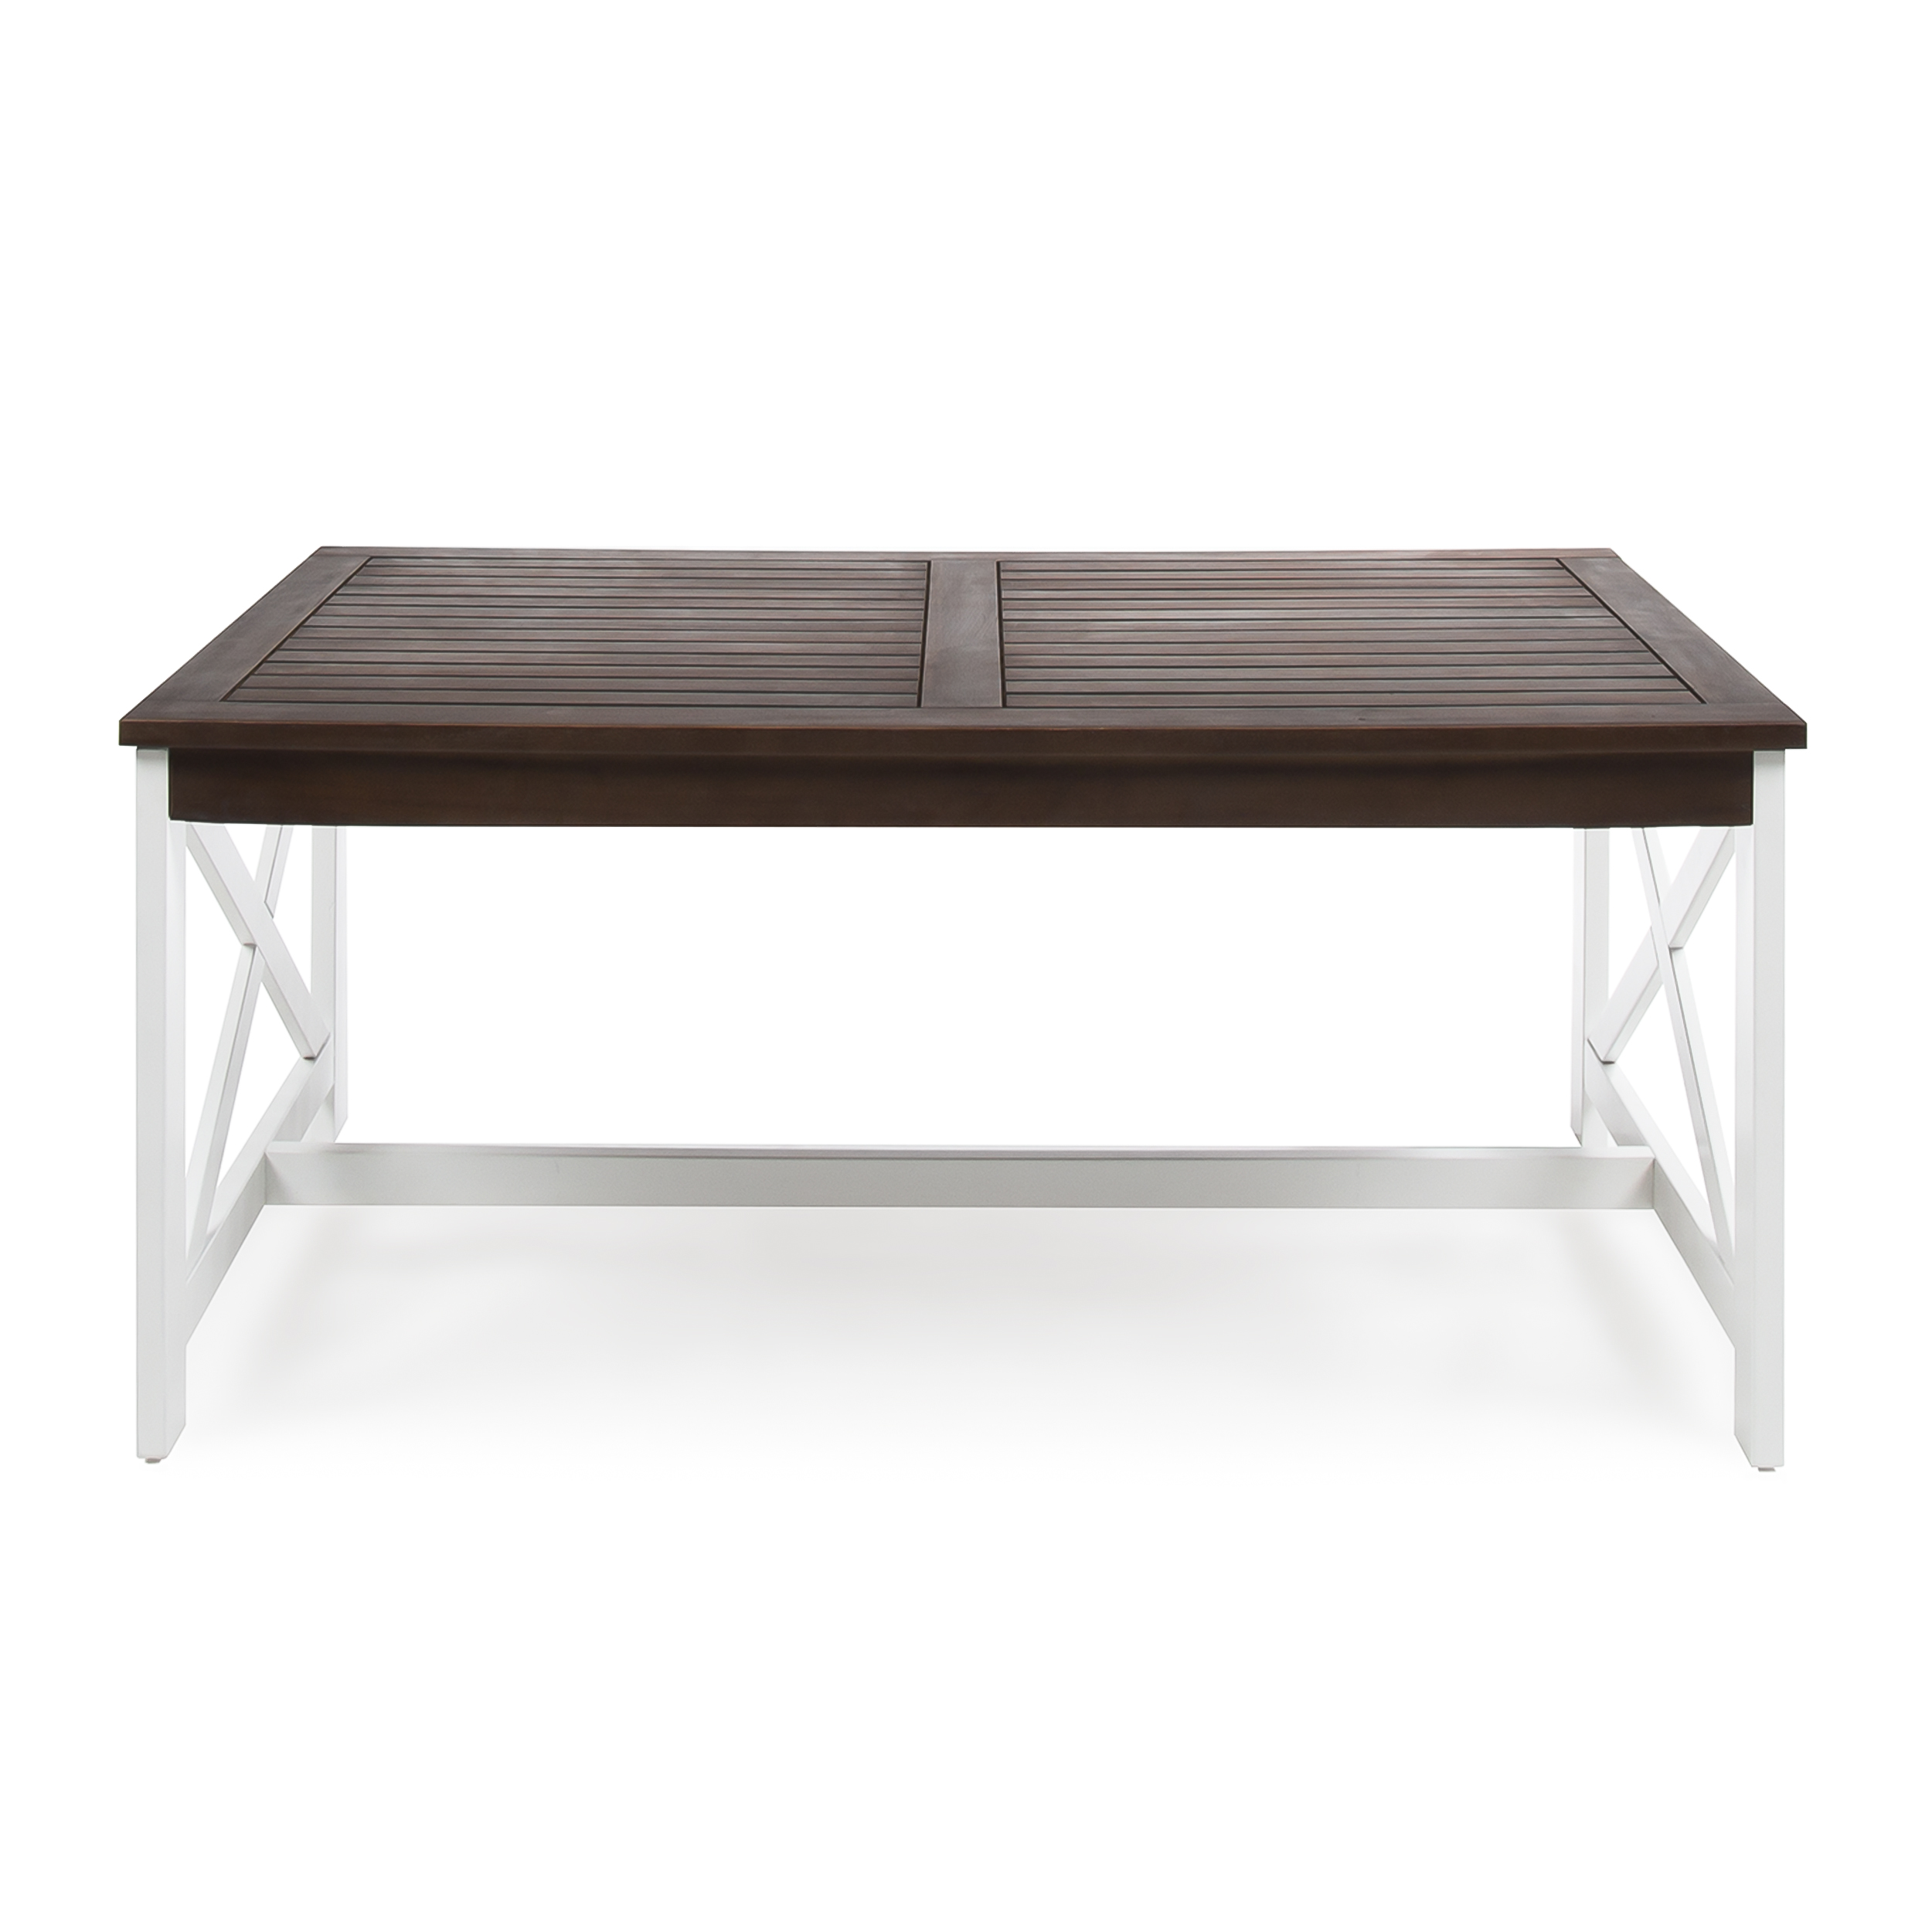 Ismus Outdoor Acacia Wood Coffee Table with a White Base, Dark Brown - image 5 of 9